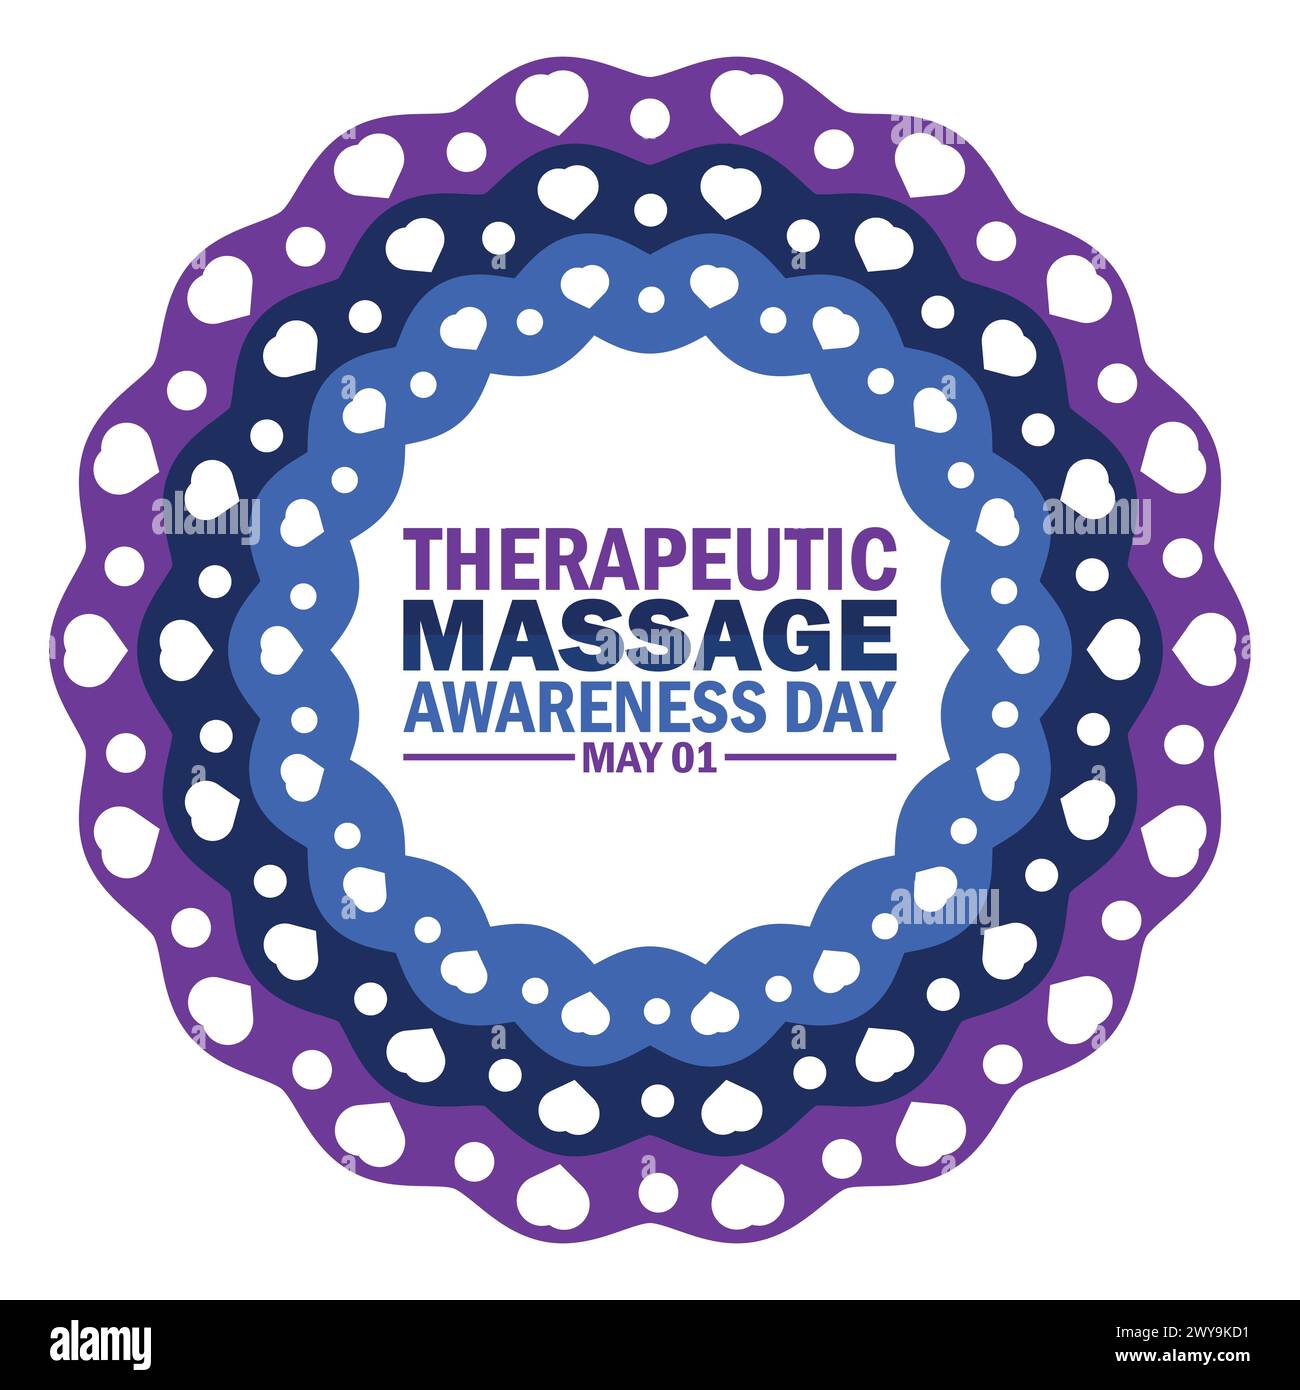 Therapeutic Massage Awareness Day. May 01. Holiday concept. Template for background, banner, card, poster with text inscription. Vector illustration Stock Vector